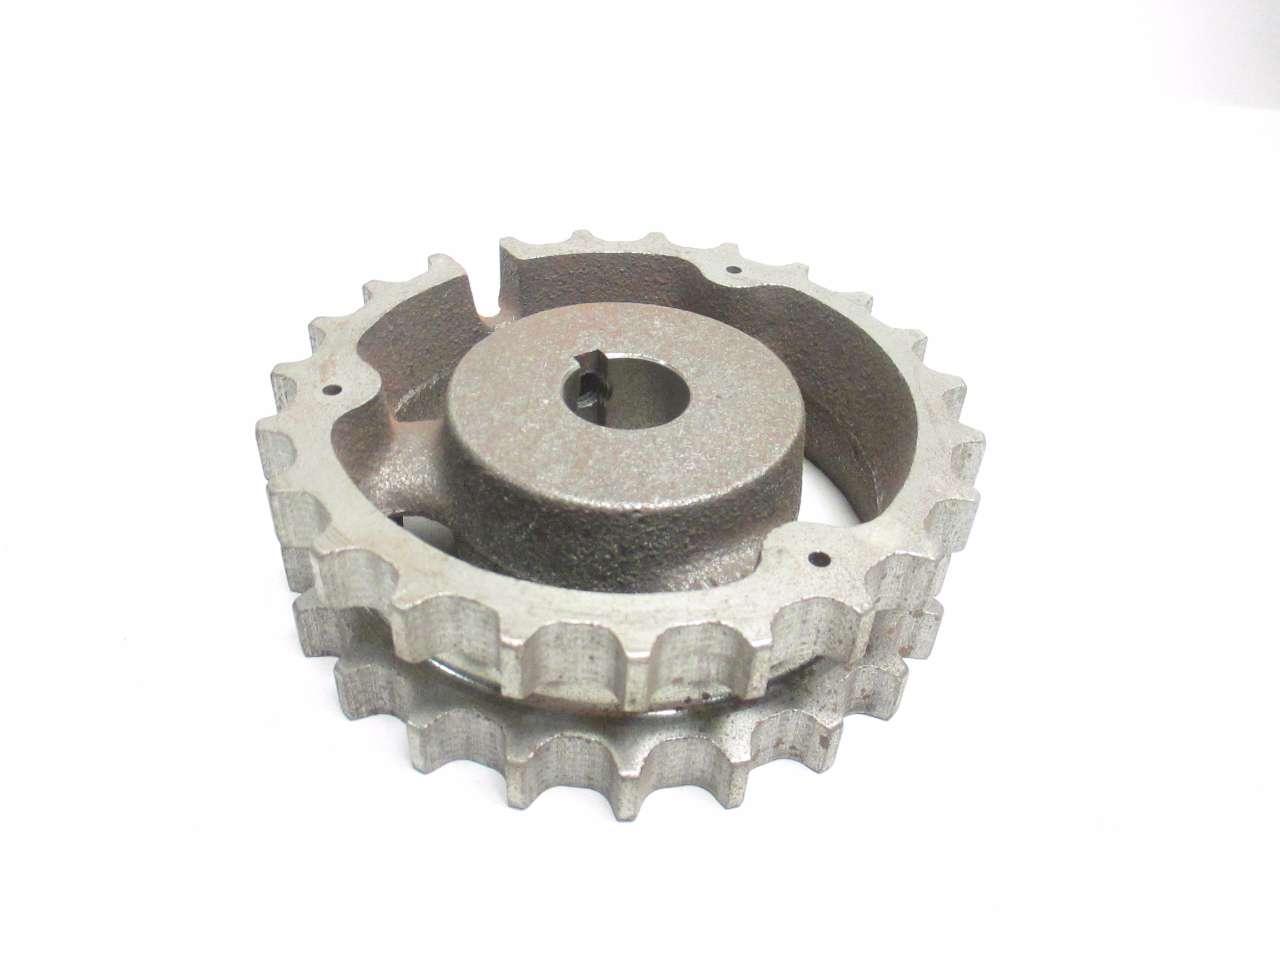 Rexnord 815-23T Tabletop Conveyor Chain Grooved Sprocket 23T 1-1/2" Bore 